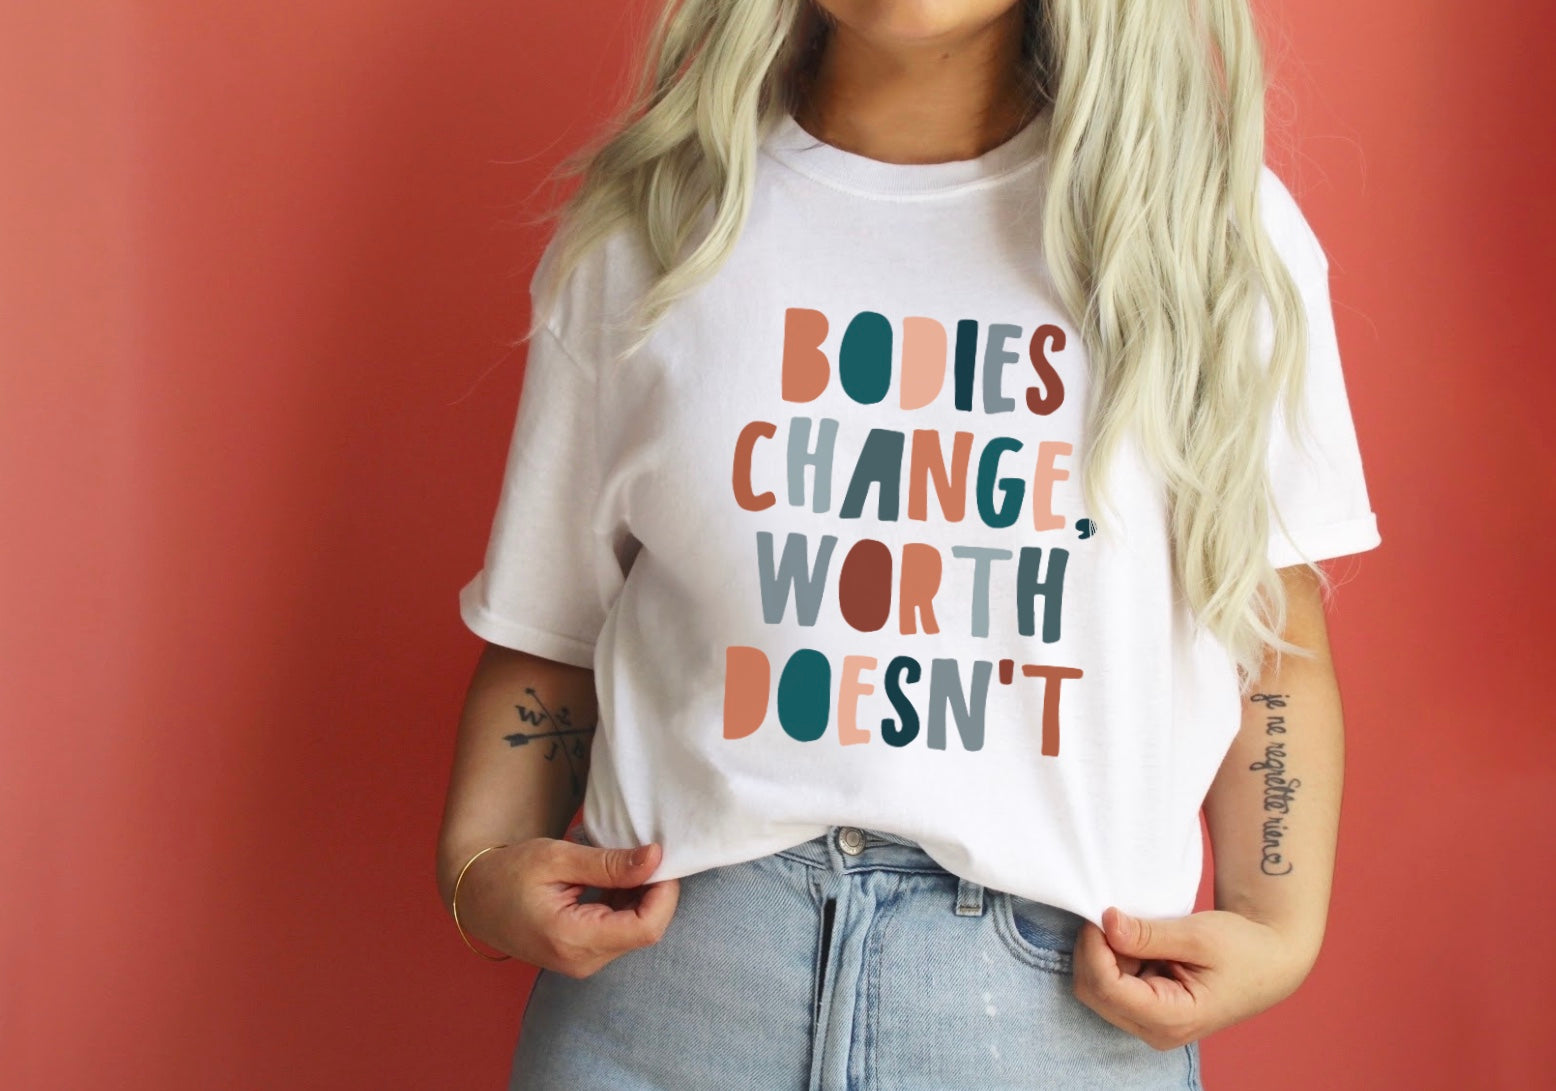 Bodies Change, Worth Doesn't Body Positivity Graphic Tee